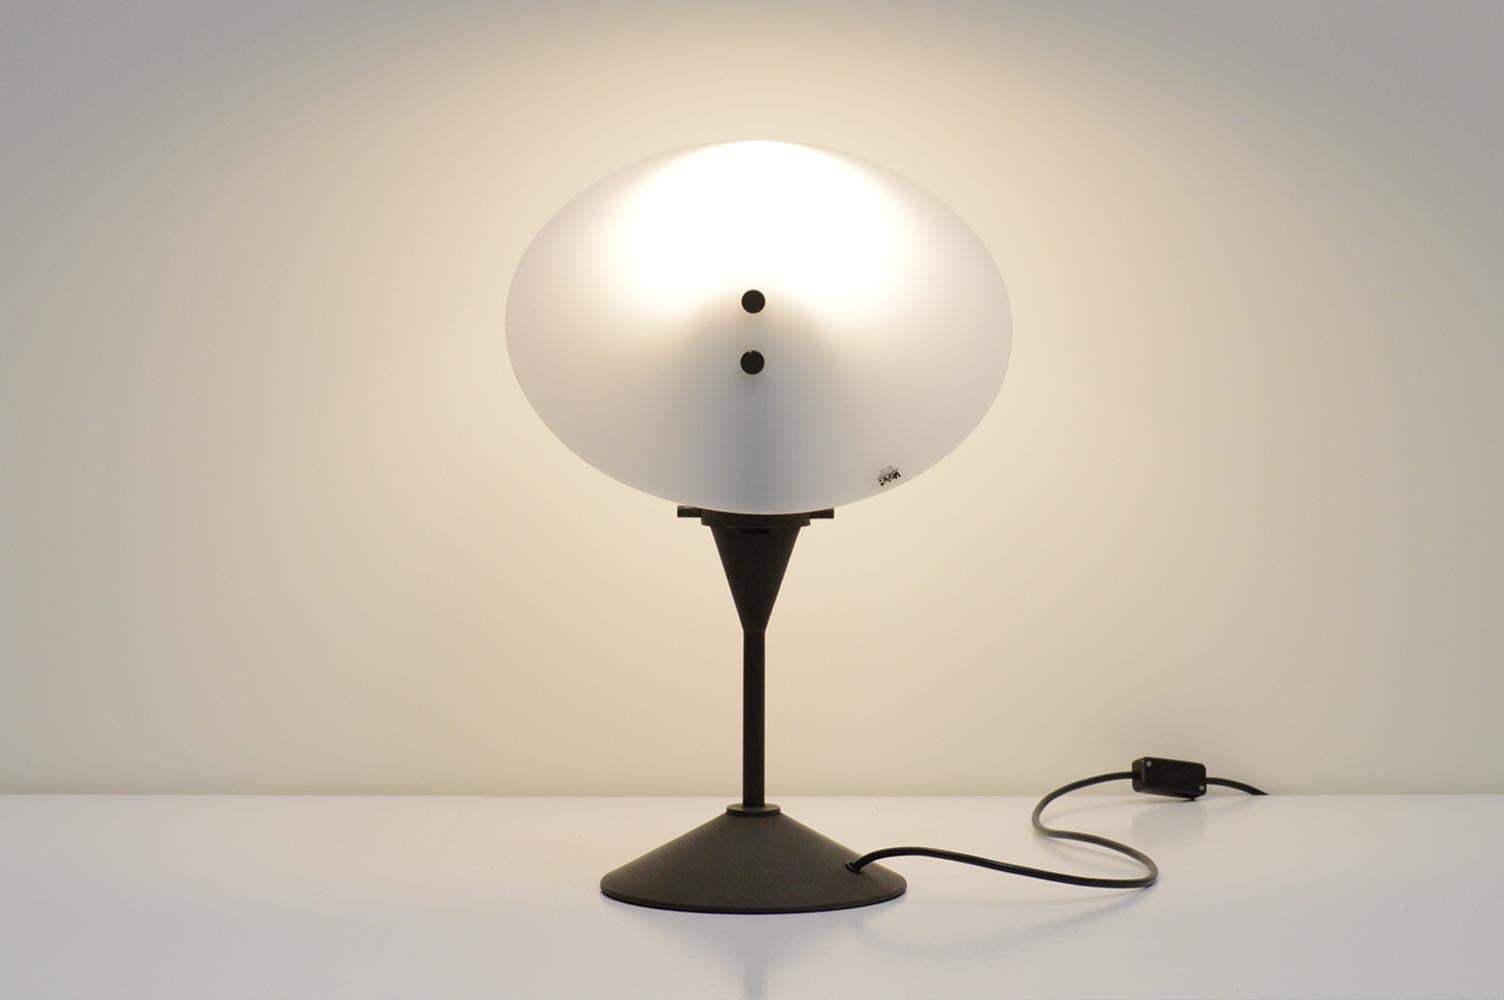 Table lamp by VeArt, Italy 1980s. White glass cone shaped shade and metal patinated base. This is a rare lamp as we can not find another one. Marked with VeArt logo on the shade. Positon as you like to get your optimal effect. Some wear on the base.